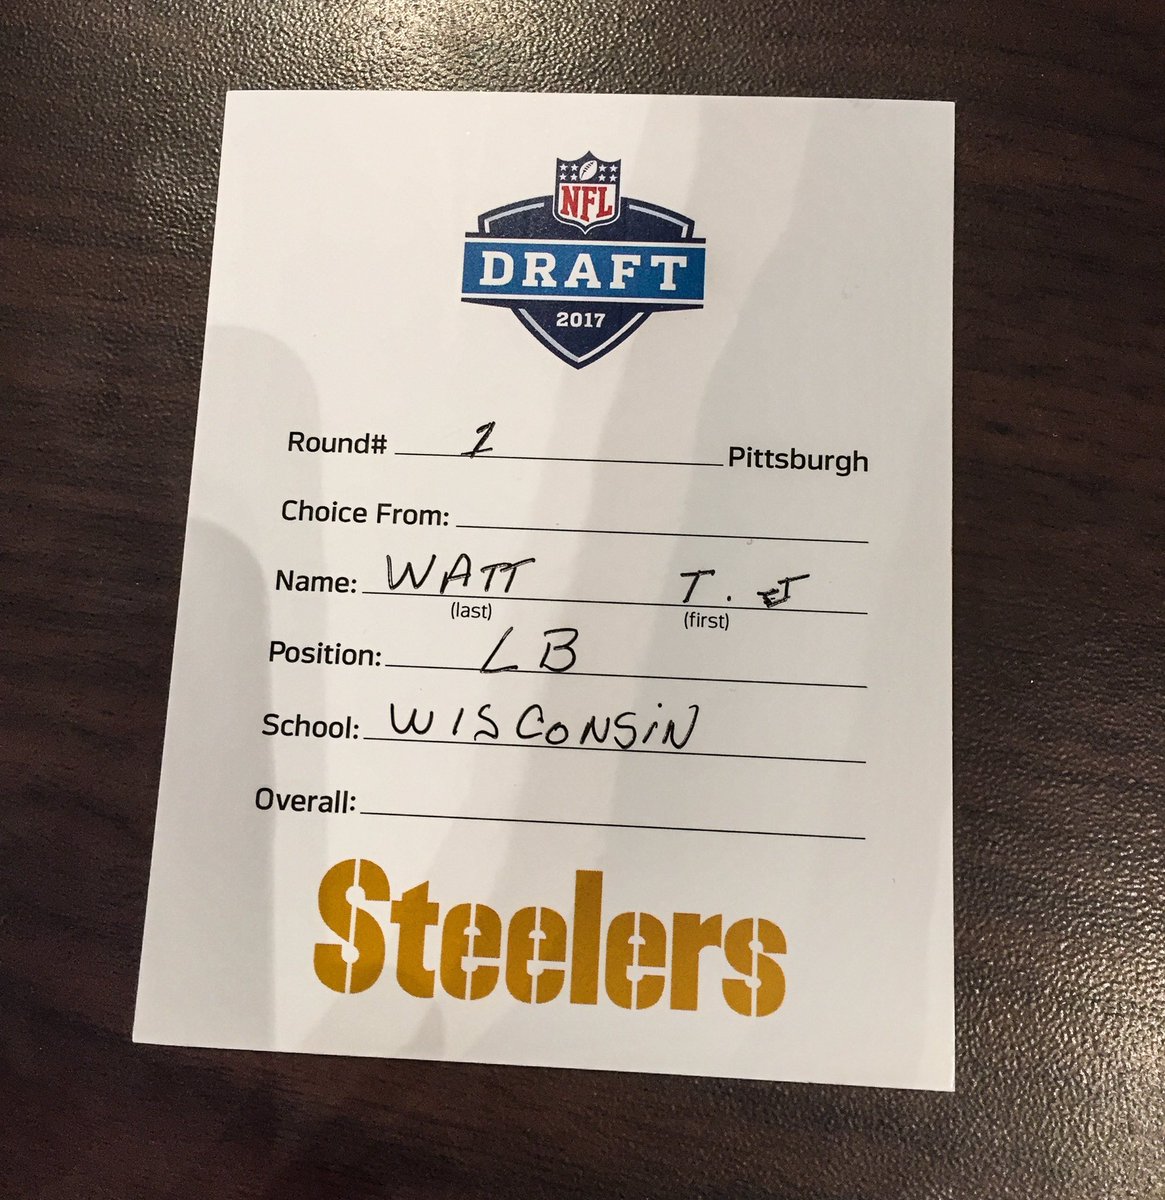 The cards that made it official 🙌

#SteelersDraft | #NFLDraft